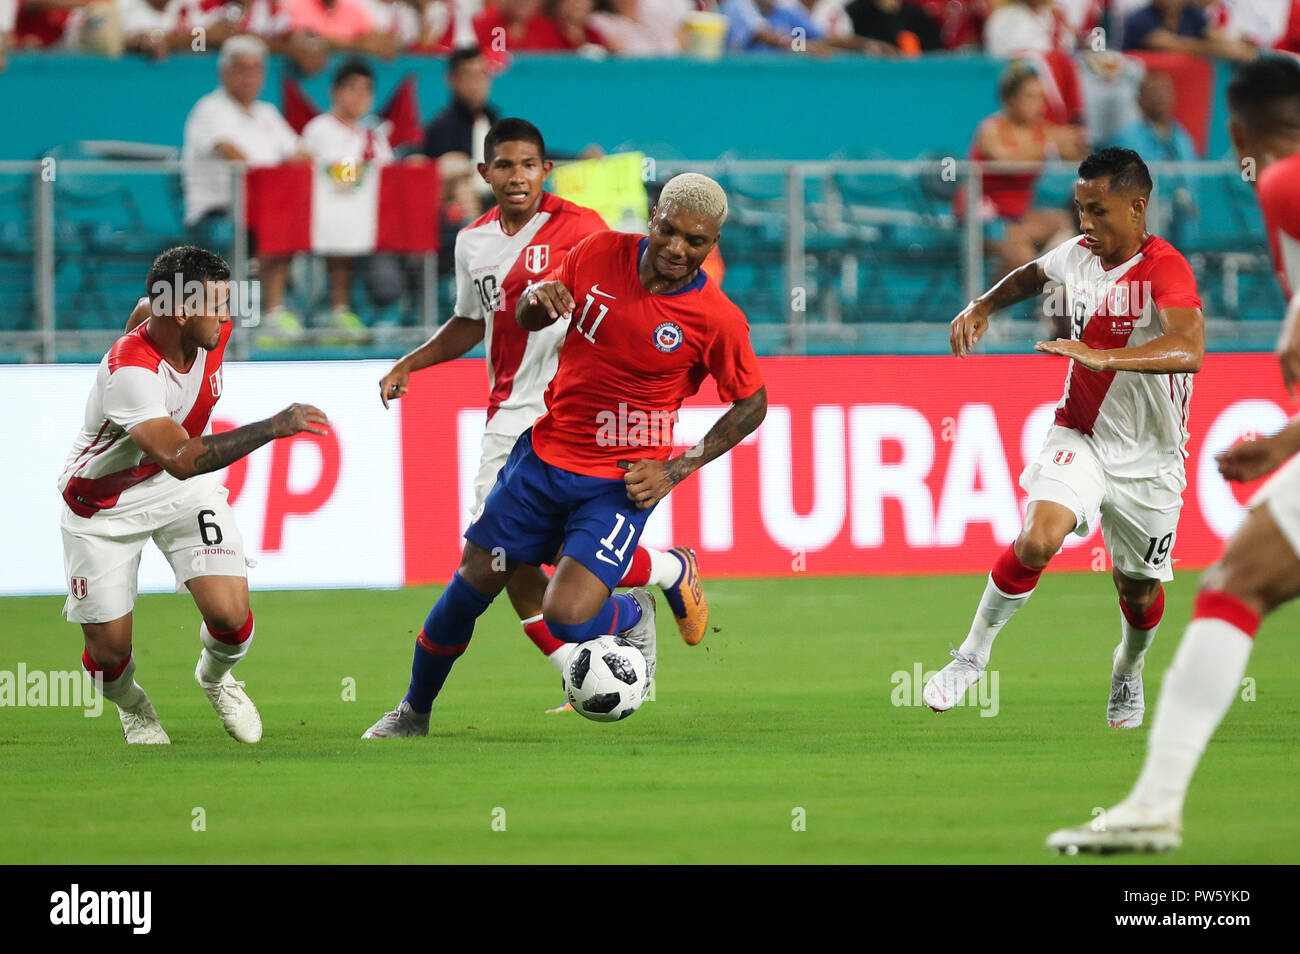 Miami Gardens, Florida, USA. 12th Oct, 2018. Chile forward JUNIOR FERNANDES (11) moves the ball, challenged by Peru defender MIGUEL TRAUCO (6), midfielder EDISON FLORES (20), and midfielder VICTOR YOTUN (19), during an international friendly match between the Peru and Chile national soccer teams, at the Hard Rock Stadium in Miami Gardens, Florida. Credit: Mario Houben/ZUMA Wire/Alamy Live News Stock Photo